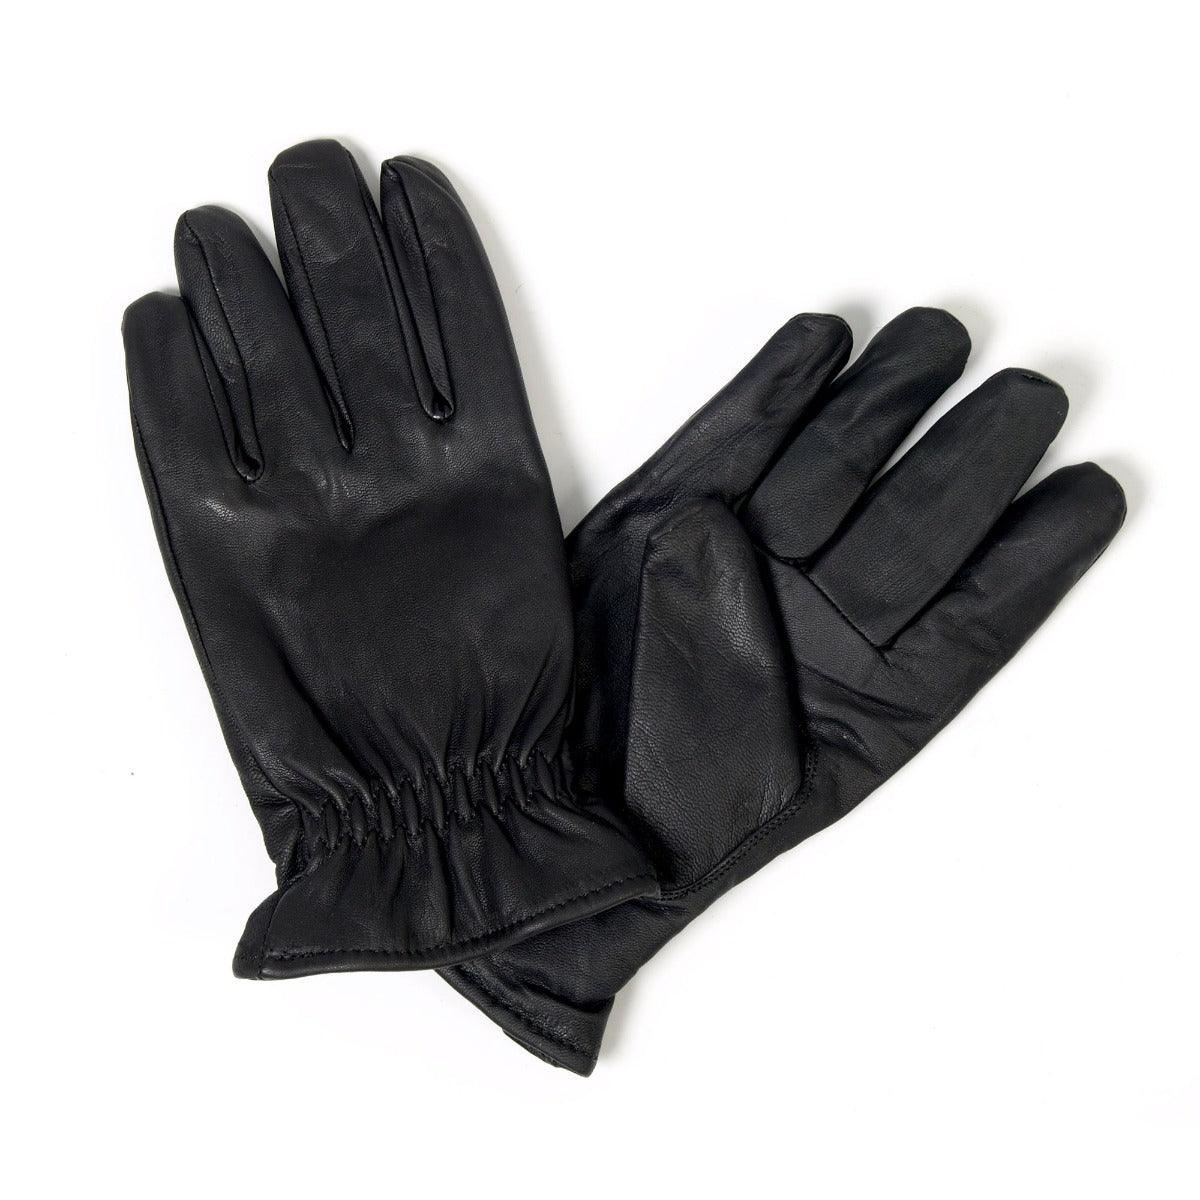 Hot Leathers Waterproof Unisex Leather Riding Glove - American Legend Rider